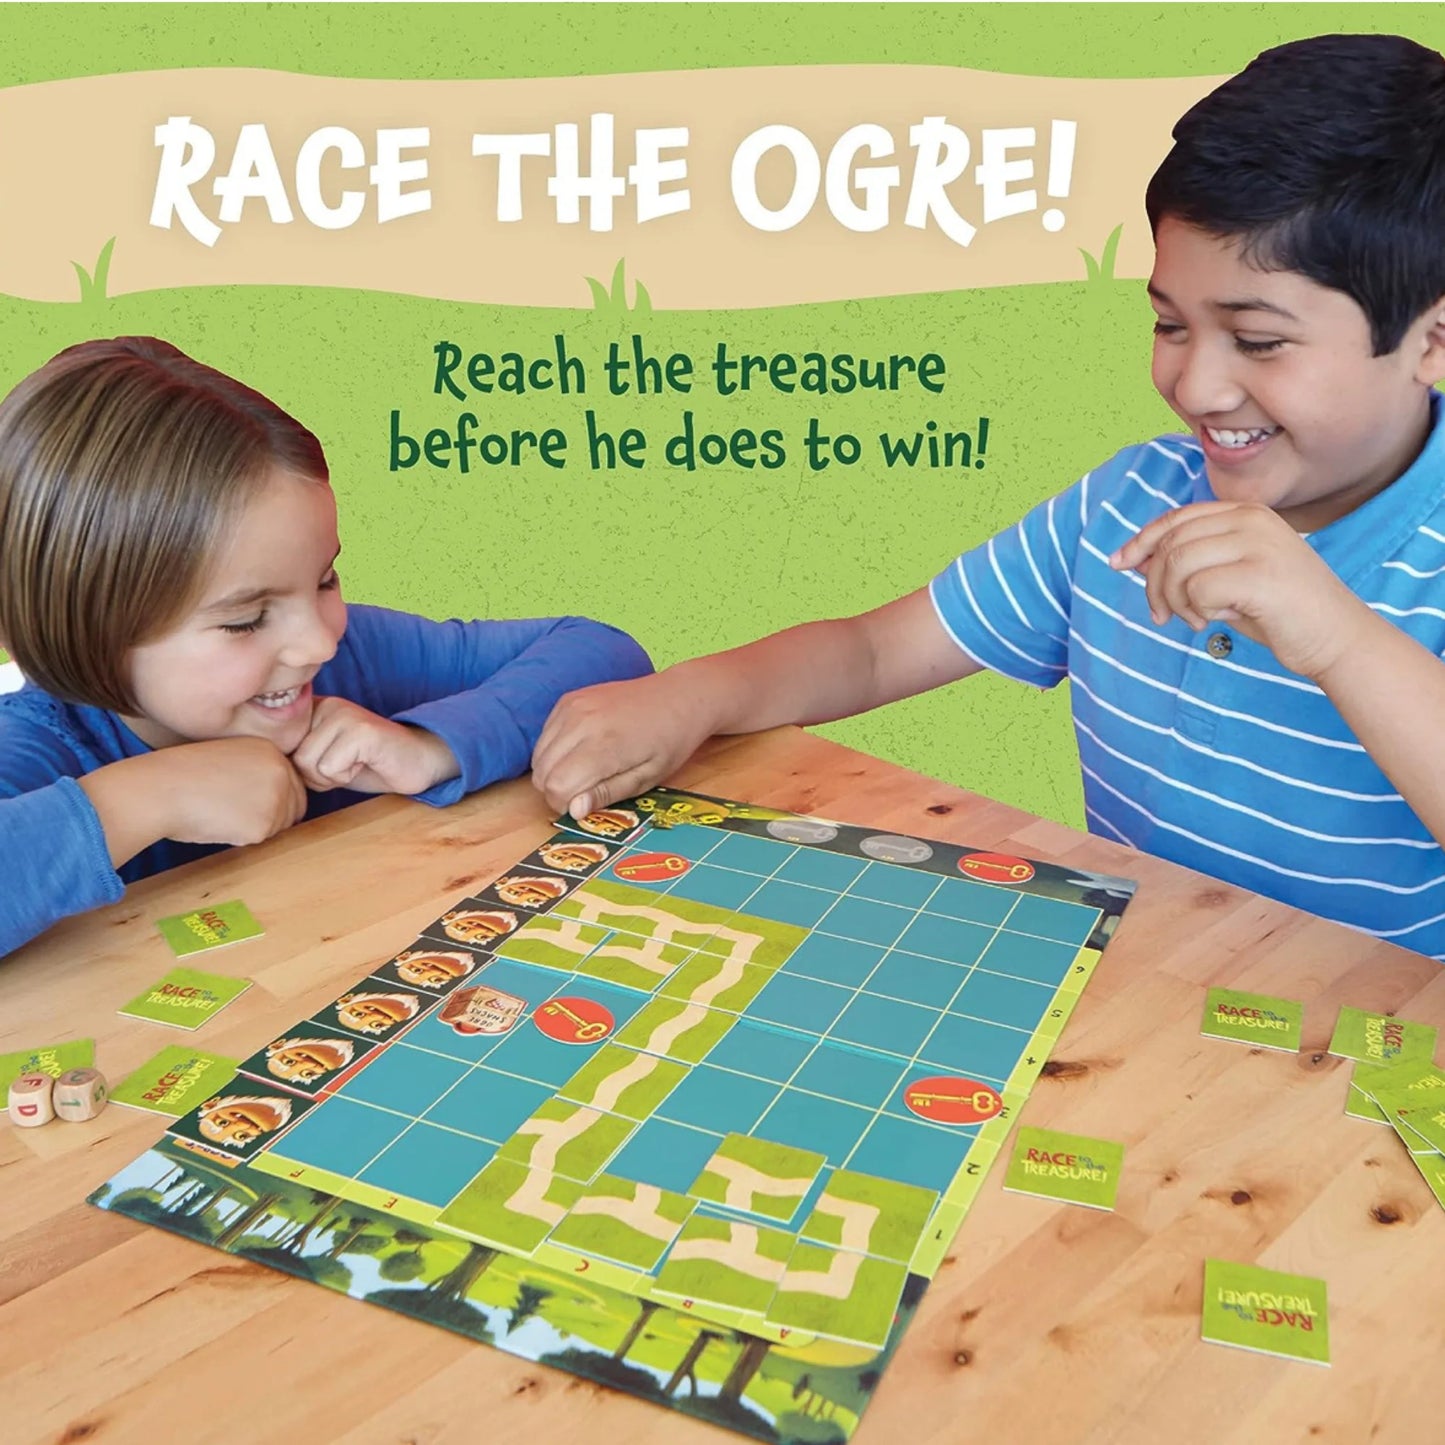 Race to the Treasure Board Game for Kids by Peaceable Kingdom - Alder & Alouette